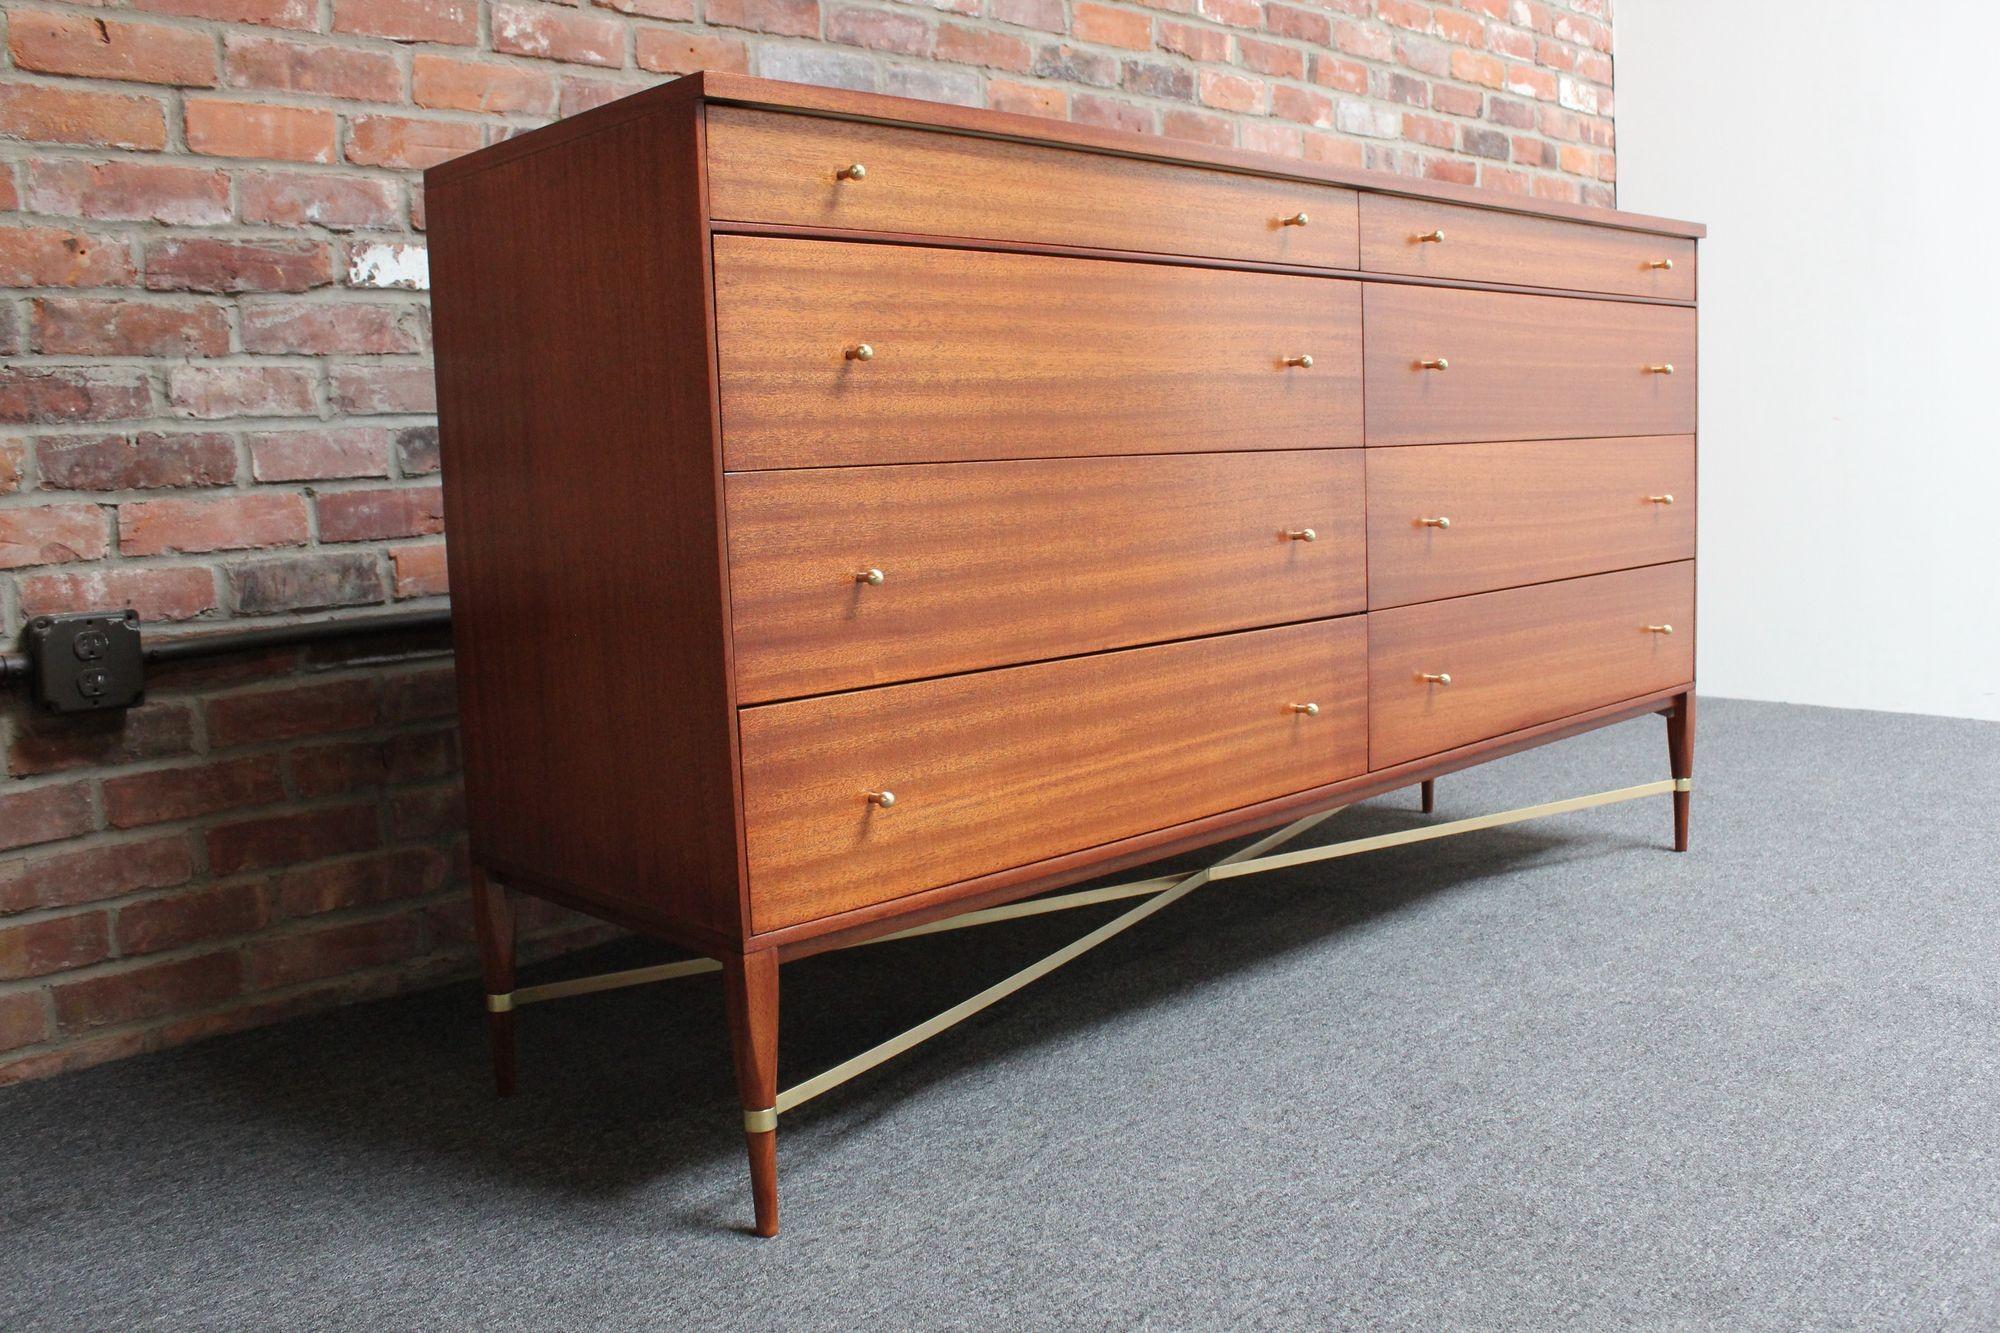 American Paul Mccobb Calvin Group Mahogany and Brass Double Dresser / Chest of Drawers